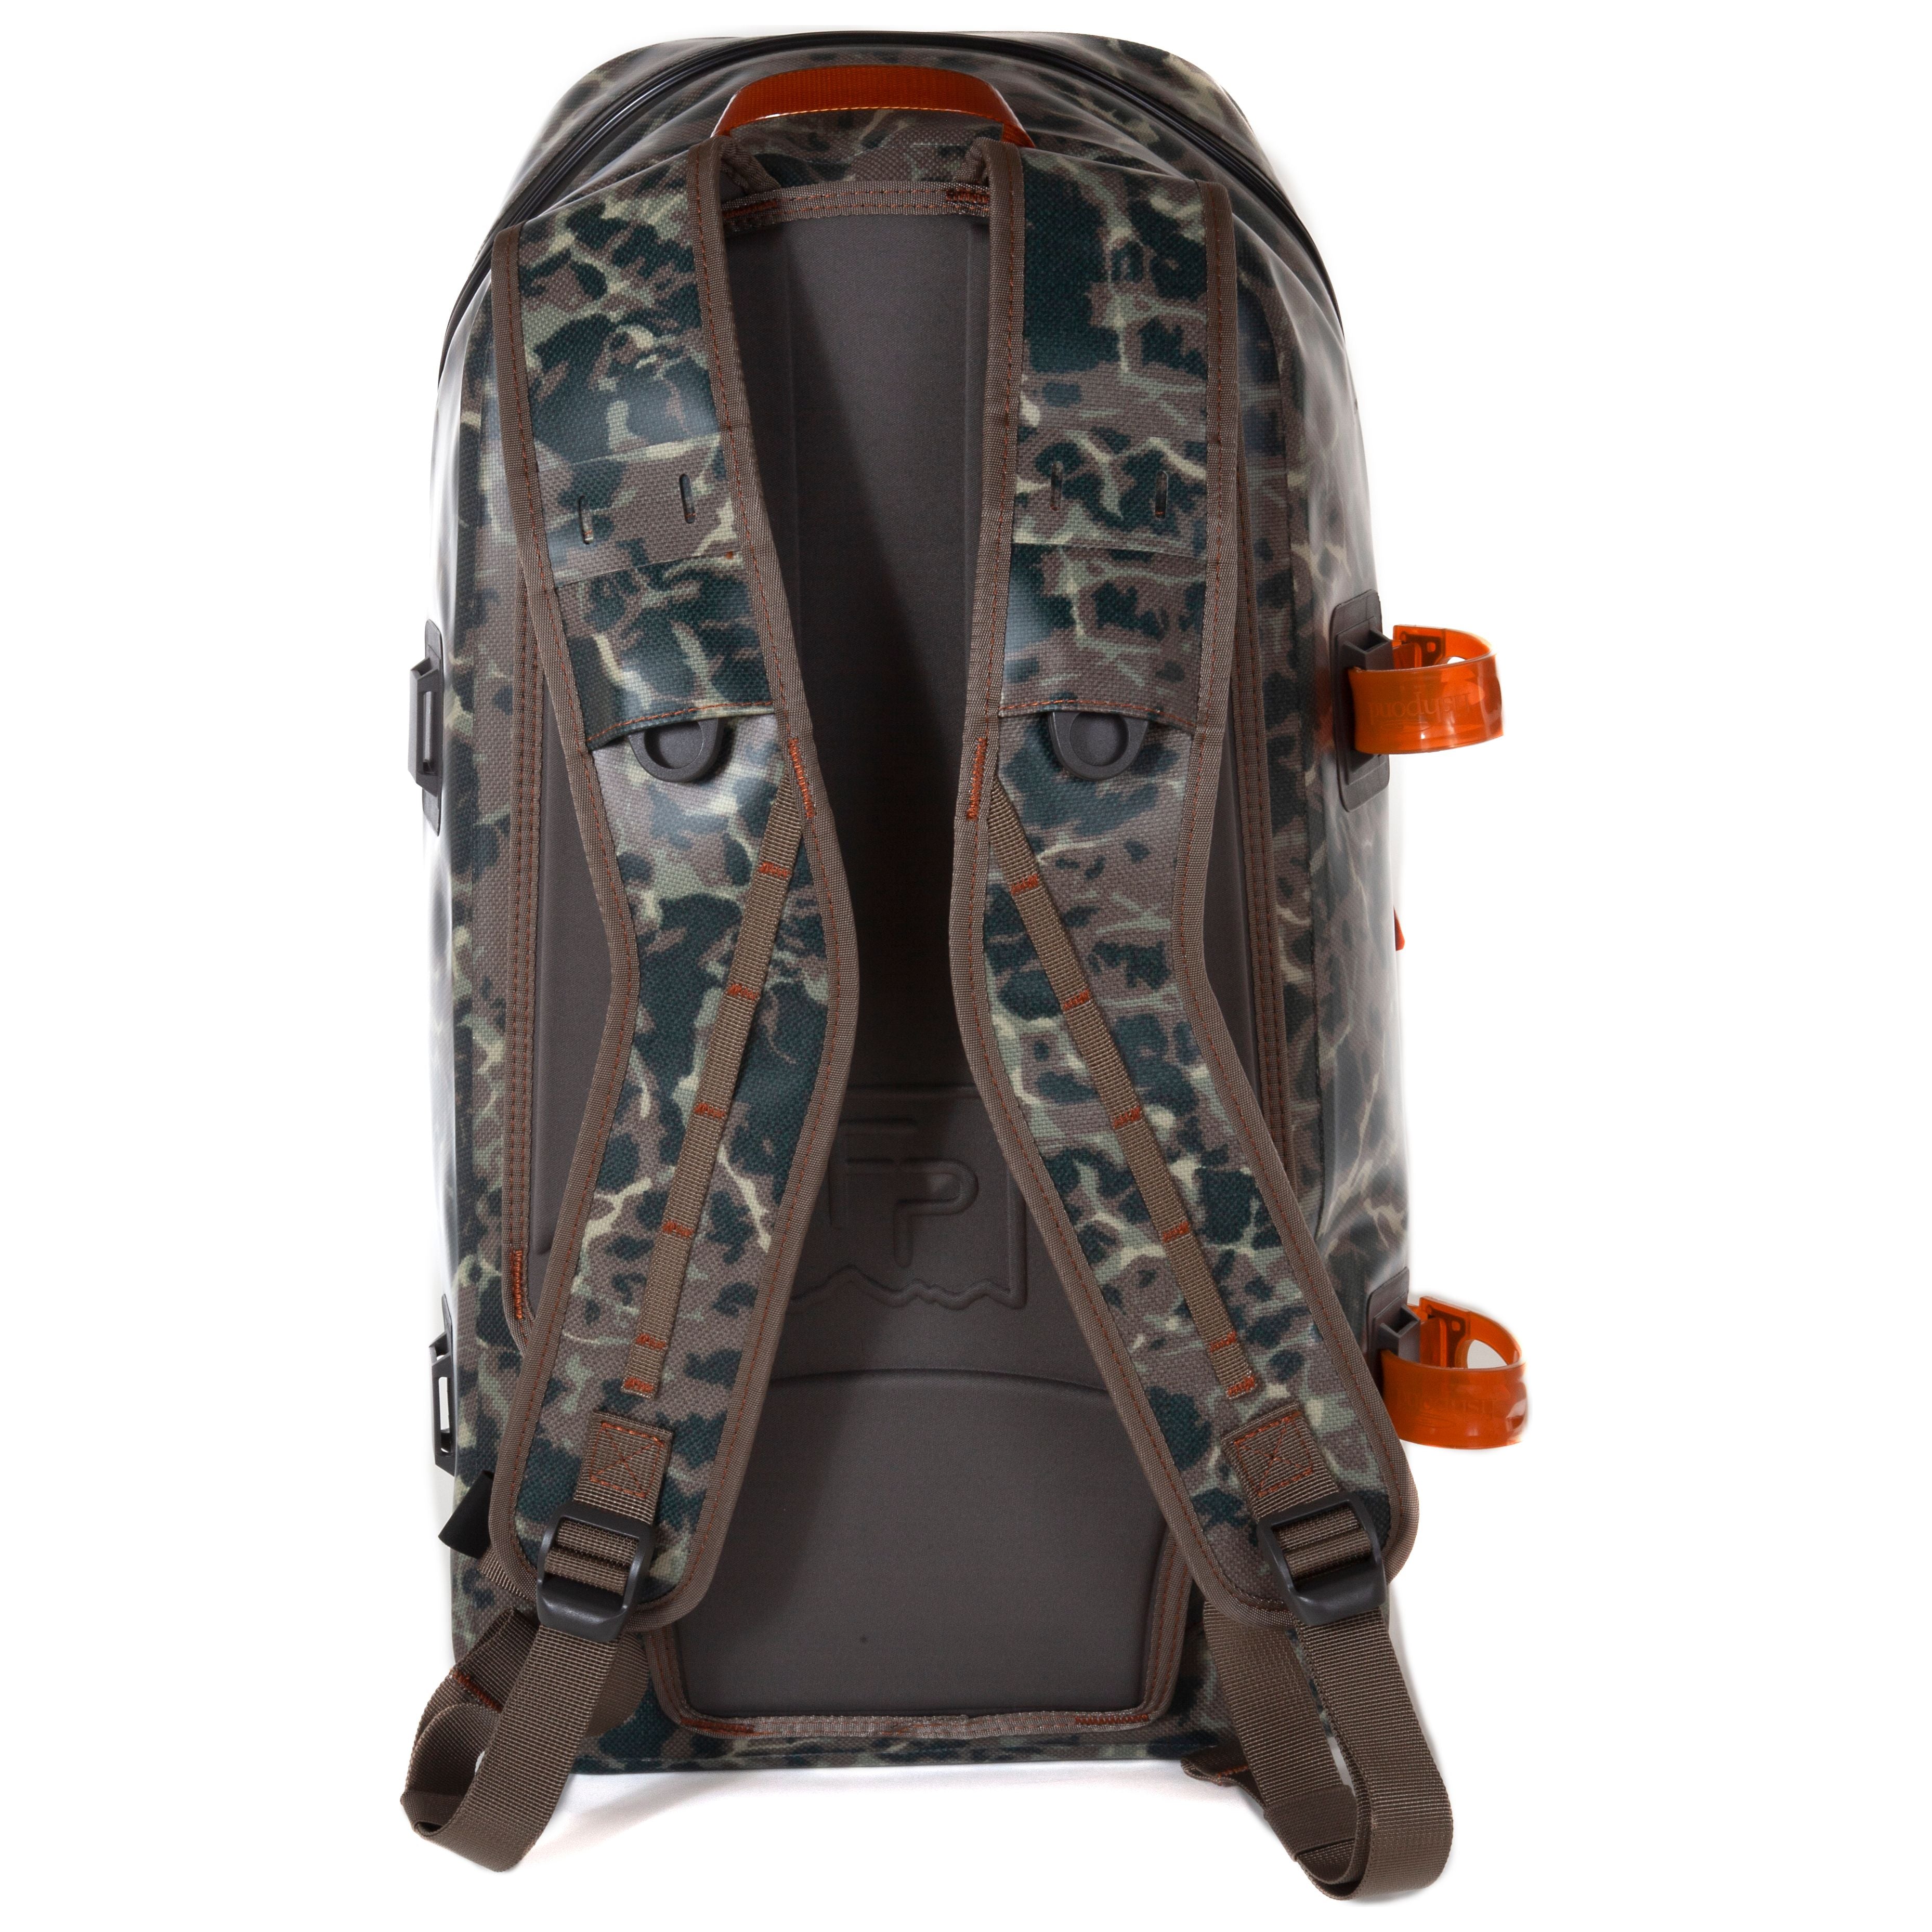 Fishpond Thunderhead Submersible Backpack – Tailwaters Fly Fishing